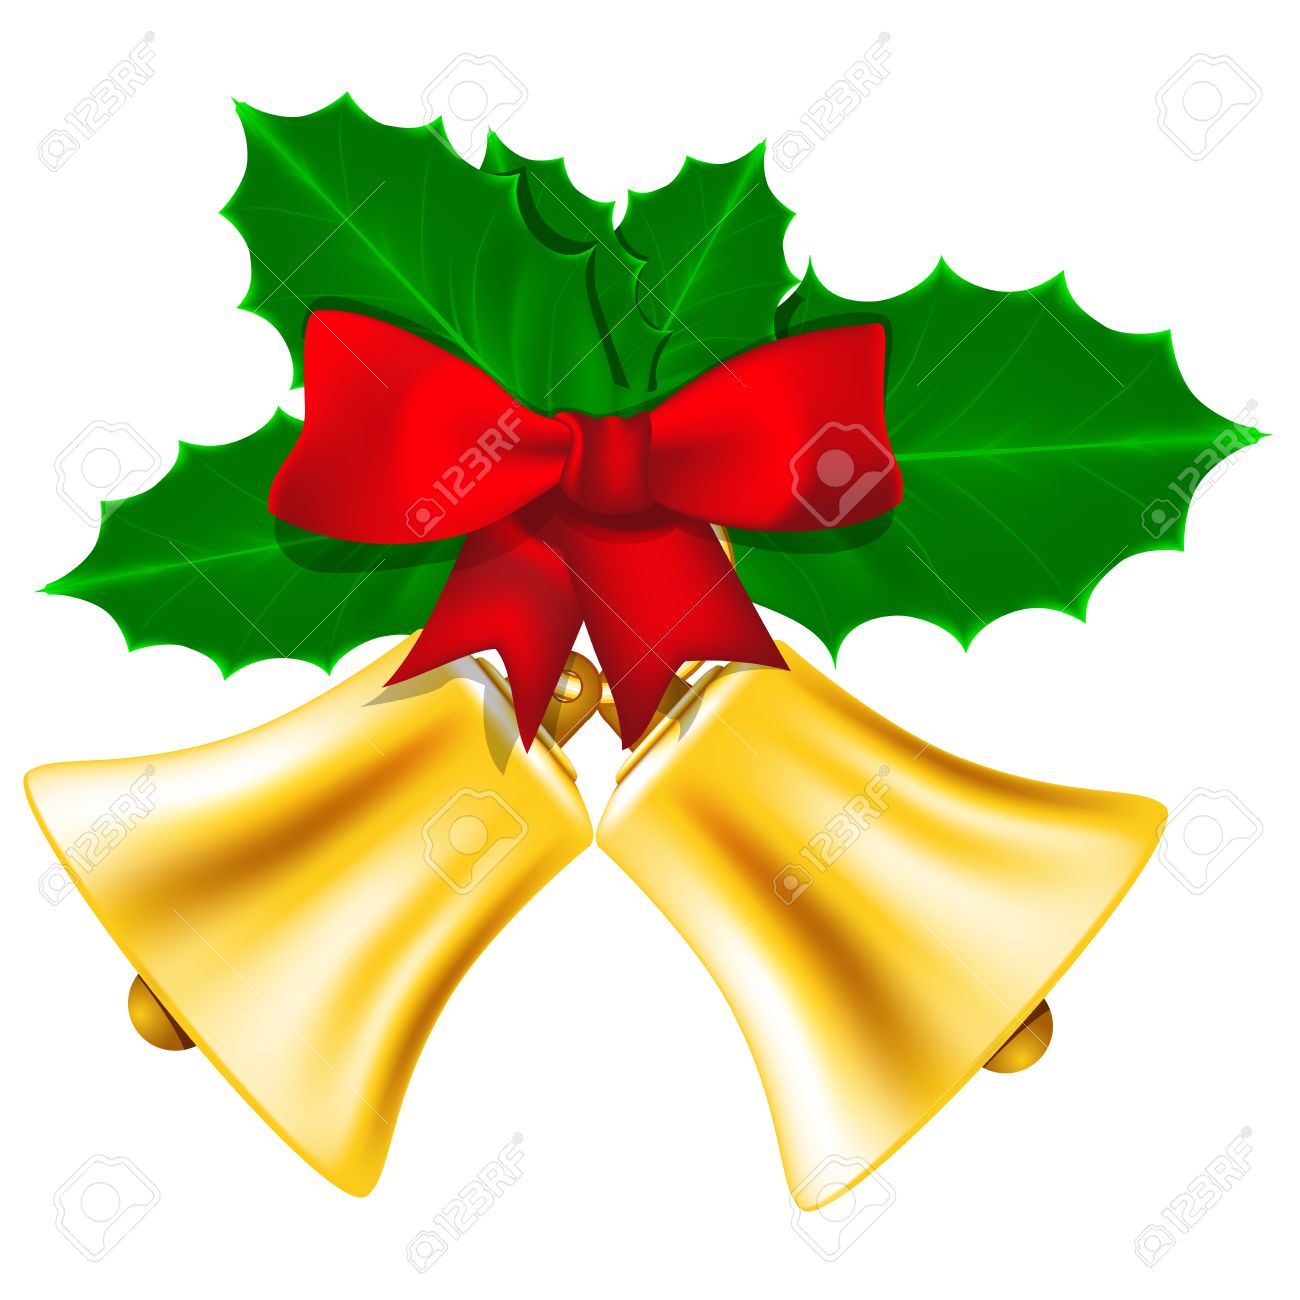 holly leaf clipart .